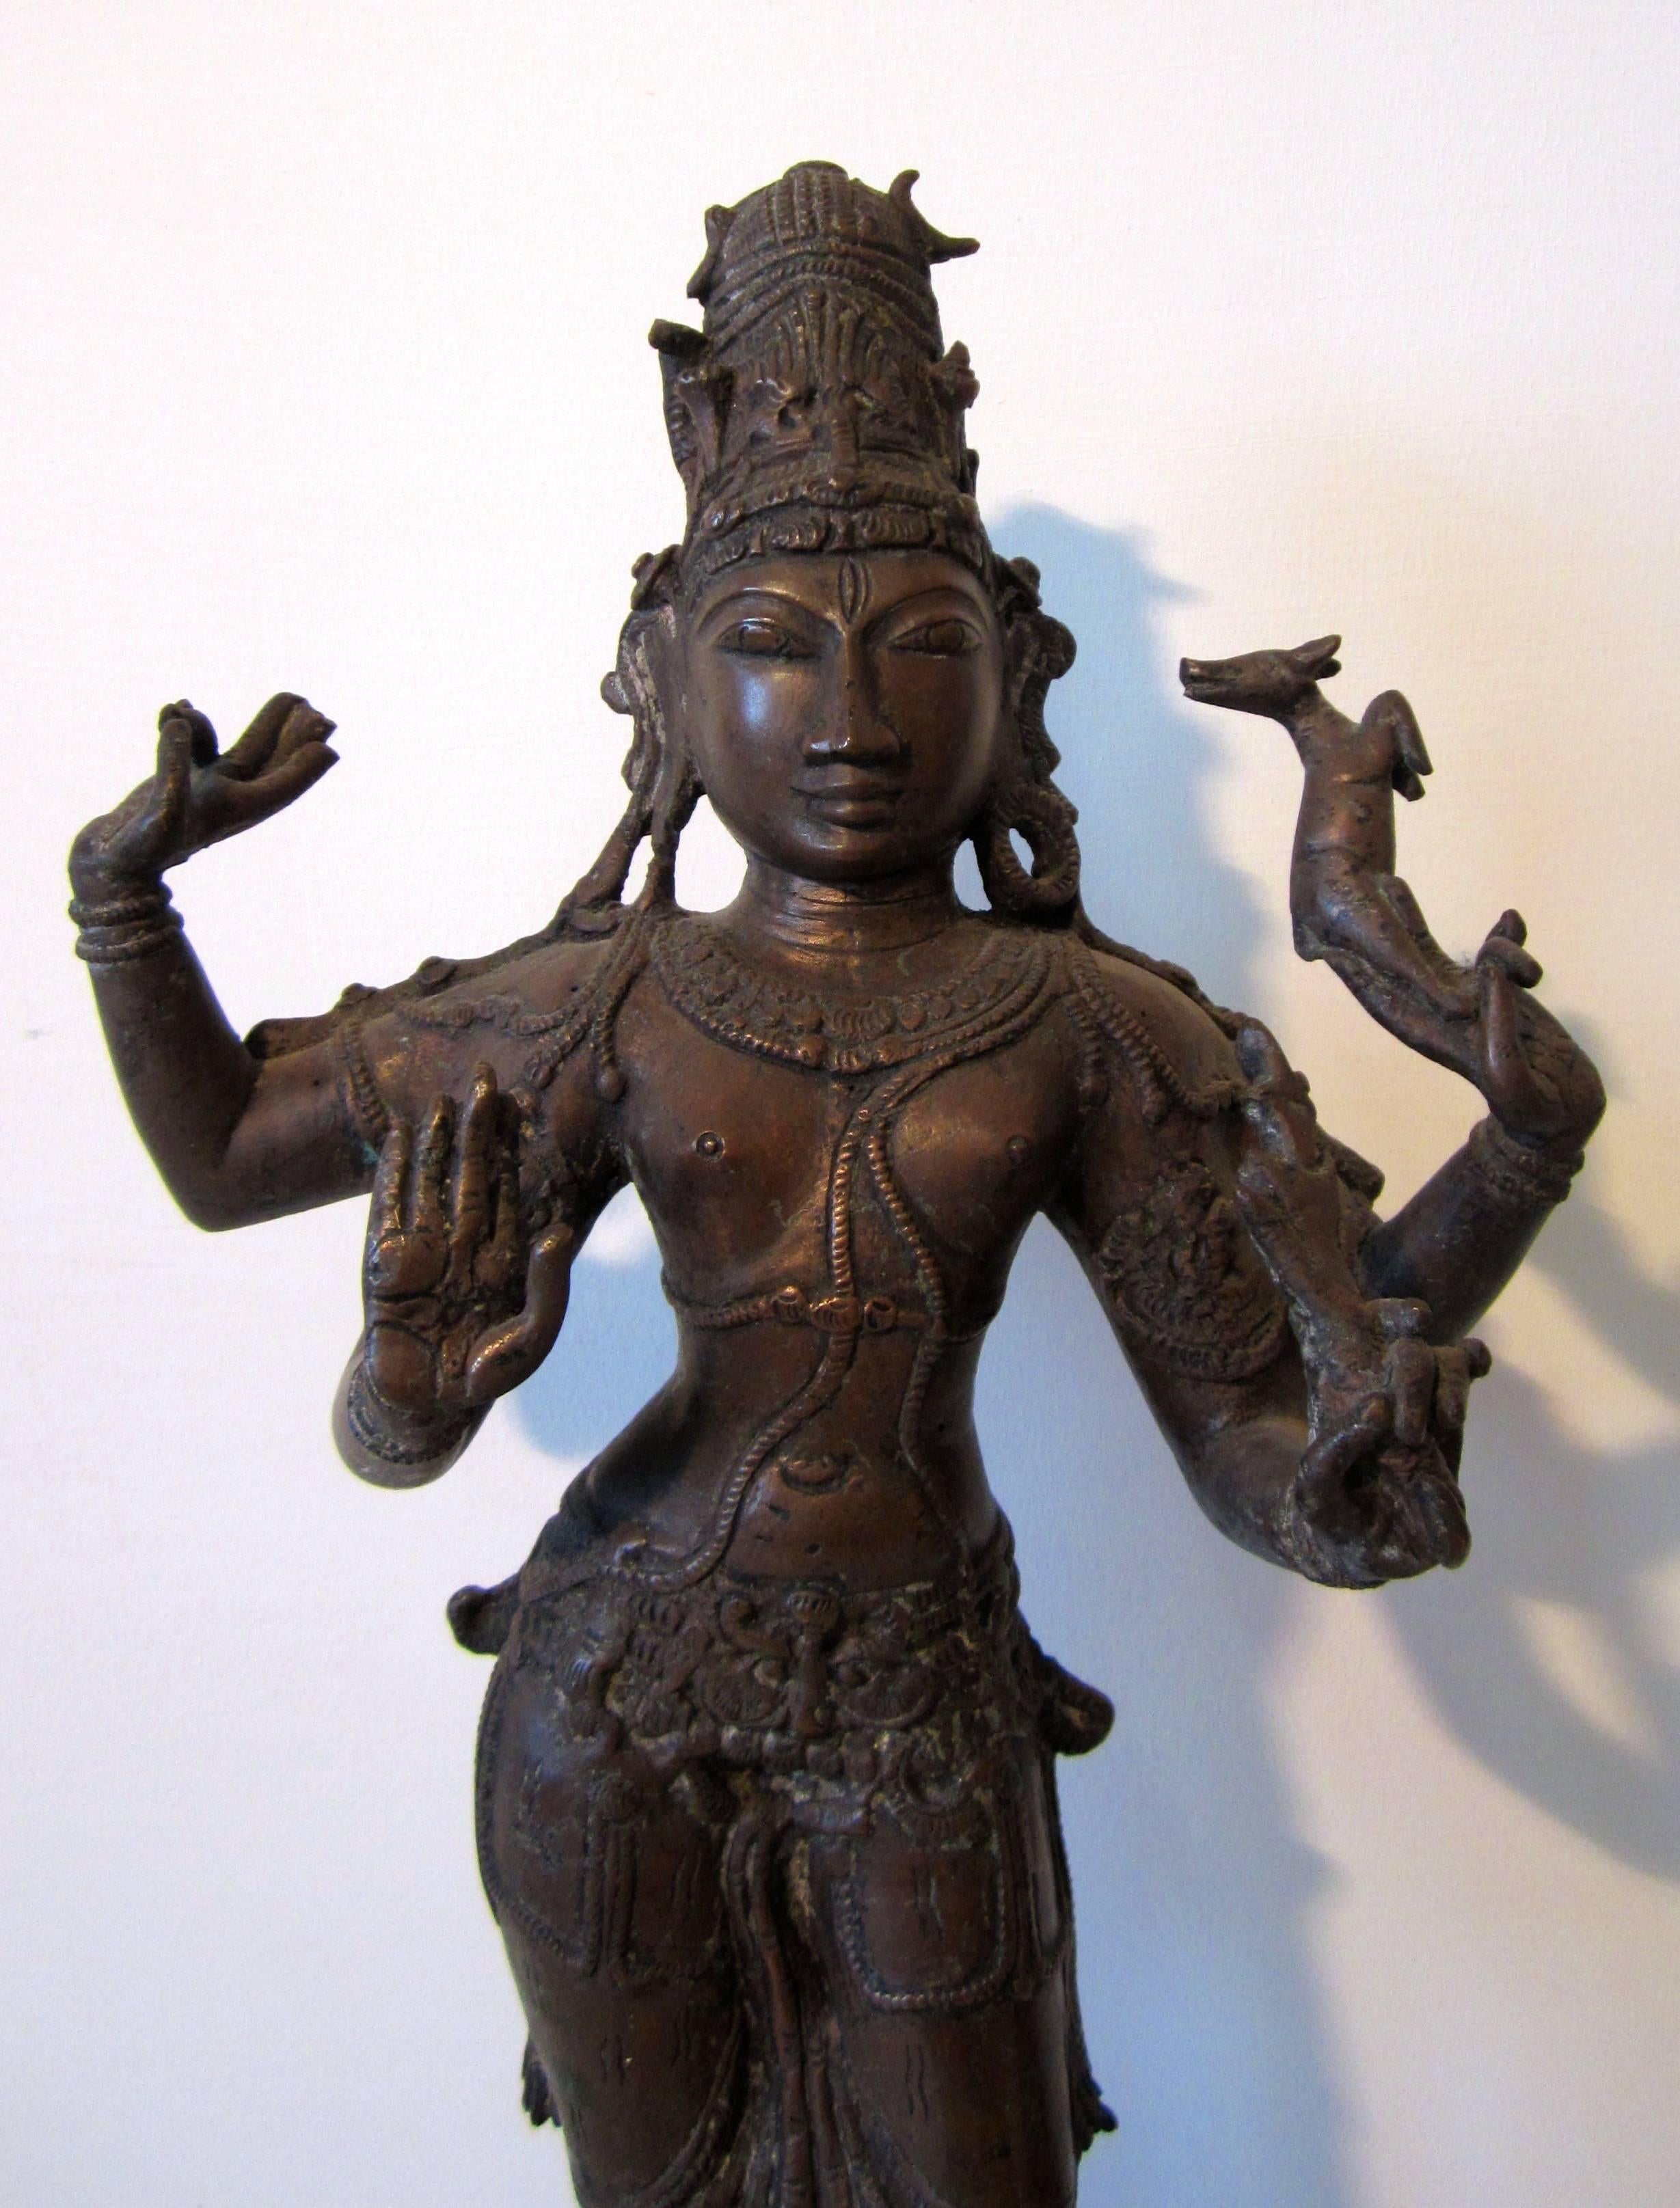 A large bronze figure of Shiva standing in the classical style of South India.